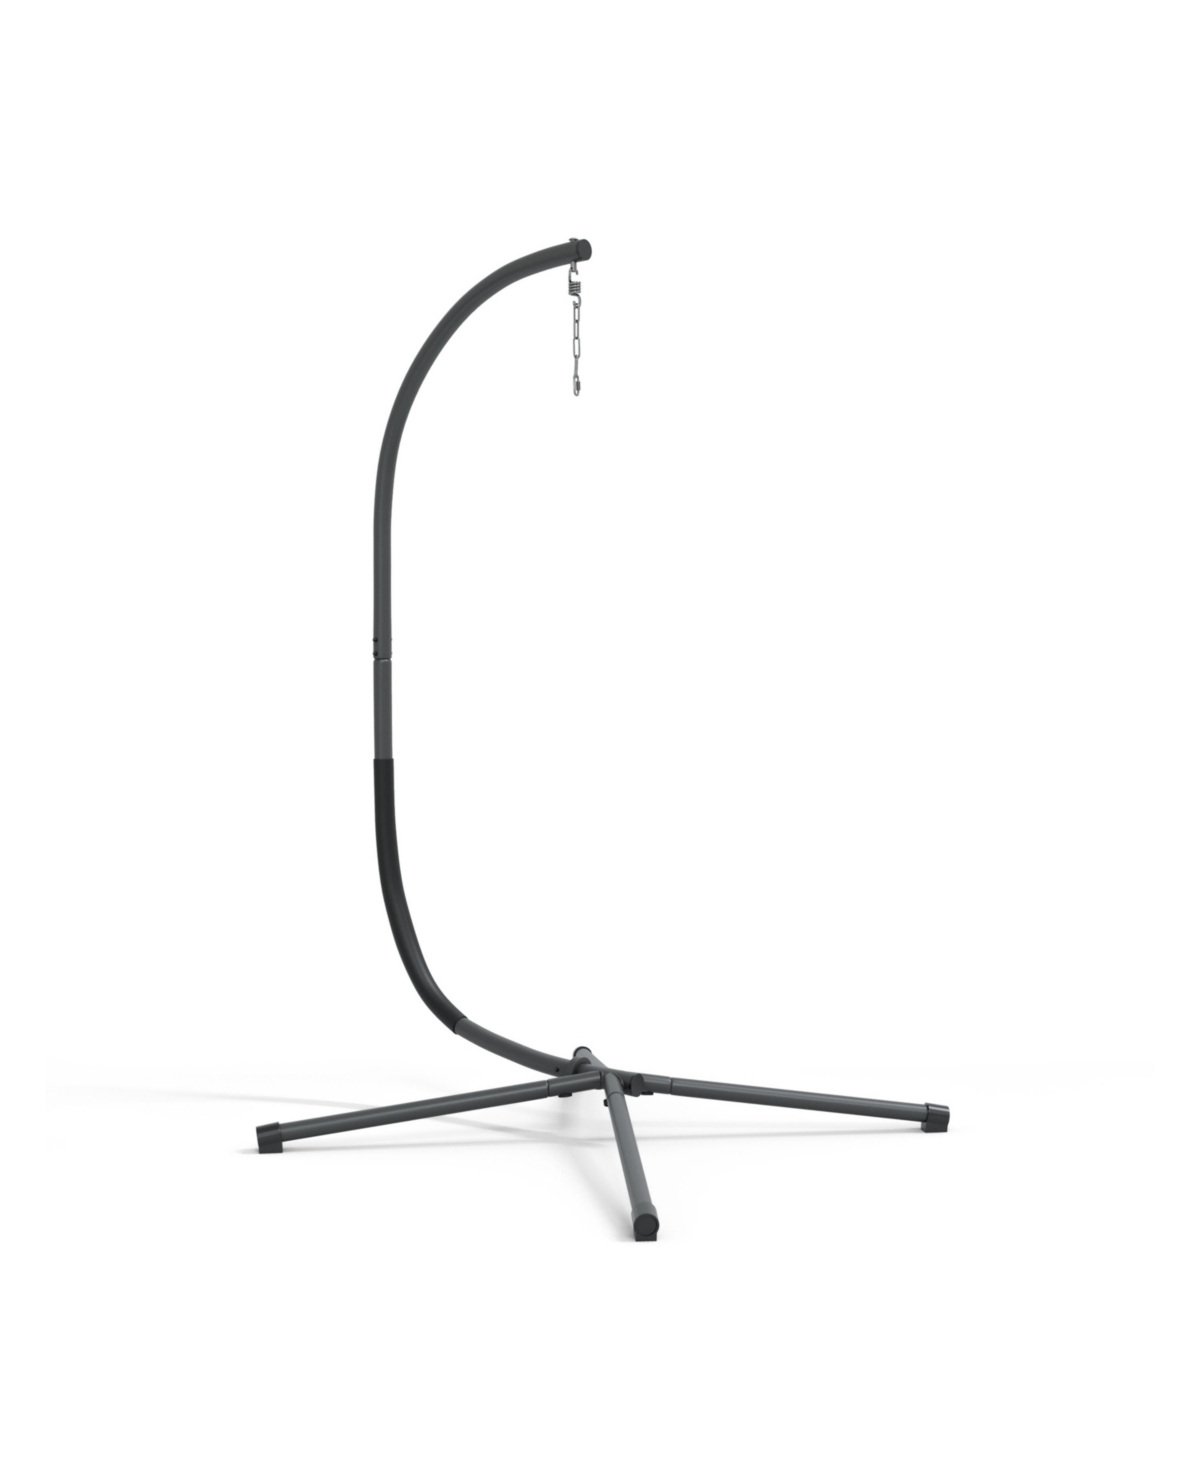 Furniture Of America 75.5" Steel Hanging Chair C Stand Hardware Included In Black